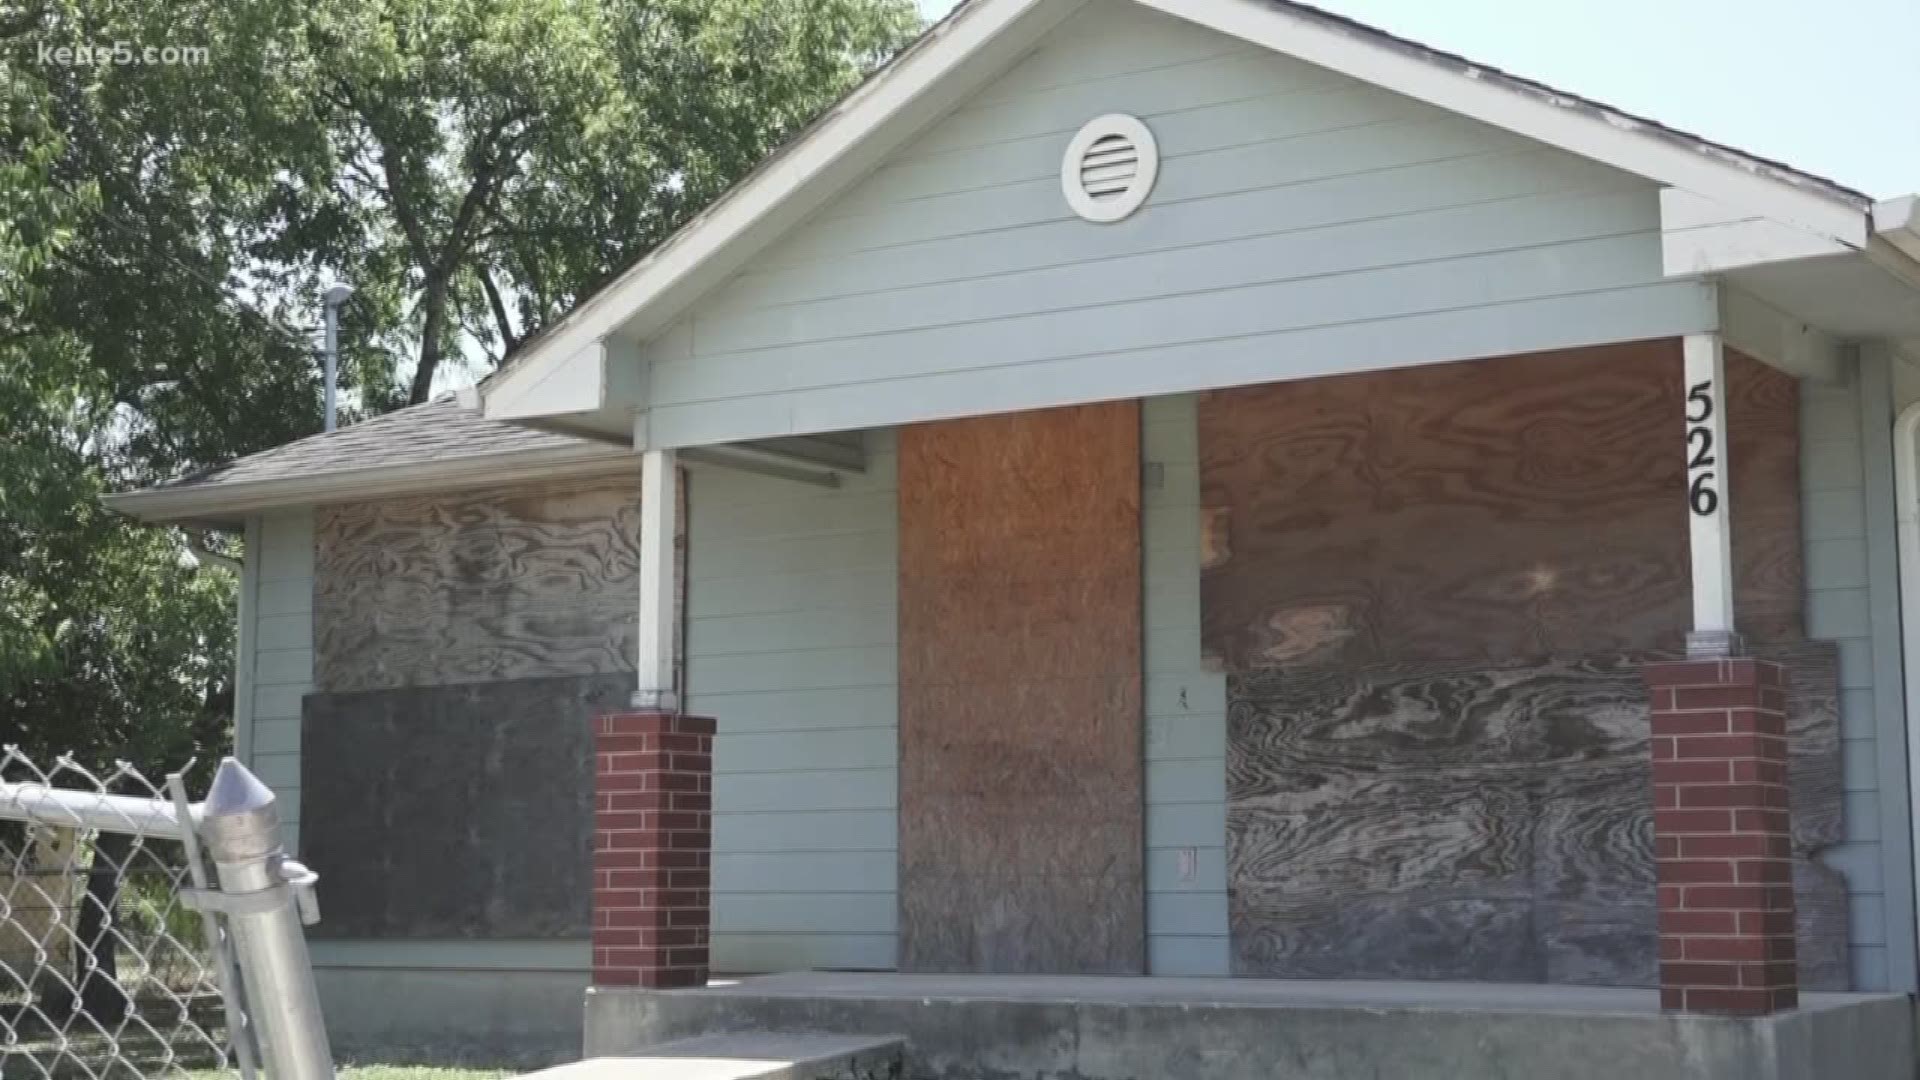 Boarded up and abandoned. KENS 5 has discovered houses meant for low-income families. Eyewitness news reporter Andrea Martinez is live from the city's southeast side with more.